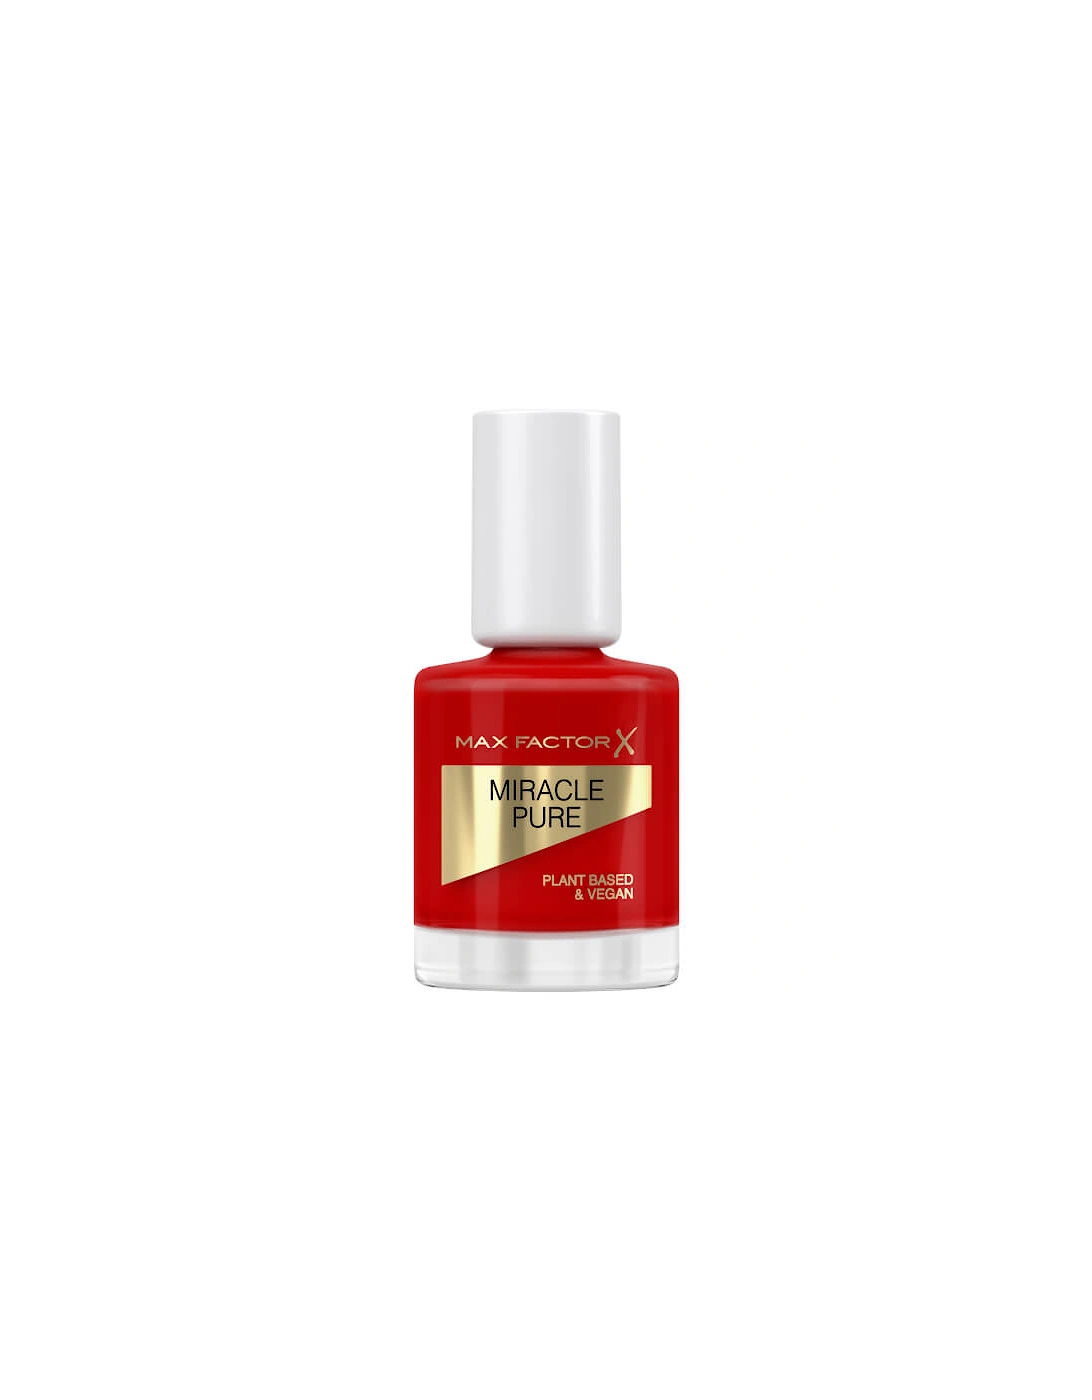 Miracle Pure Nail Polish Lacquer - Scarlet Poppy, 2 of 1